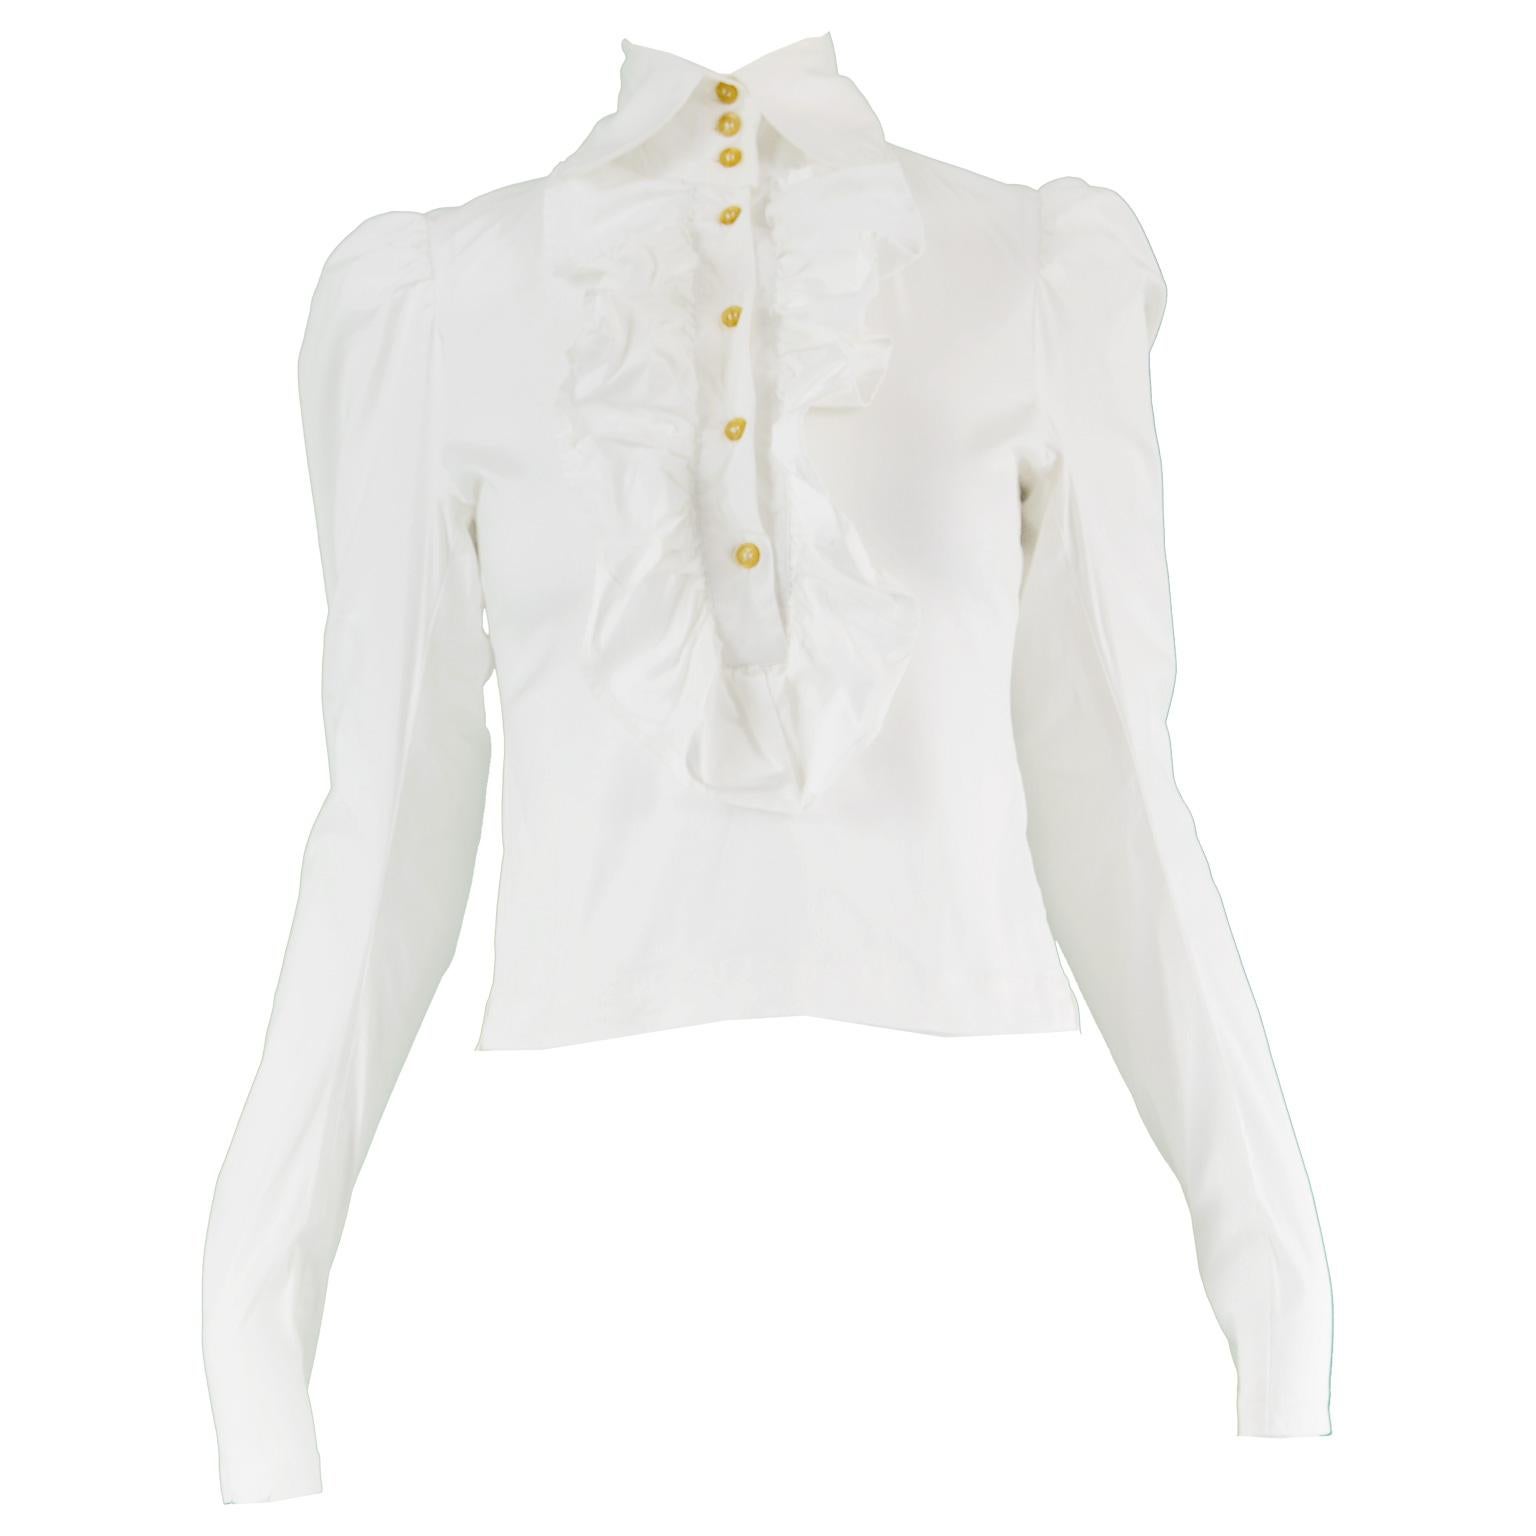 Vivienne Westwood Vintage Women's White Ruffled Victoriana Shirt, 1990s For Sale